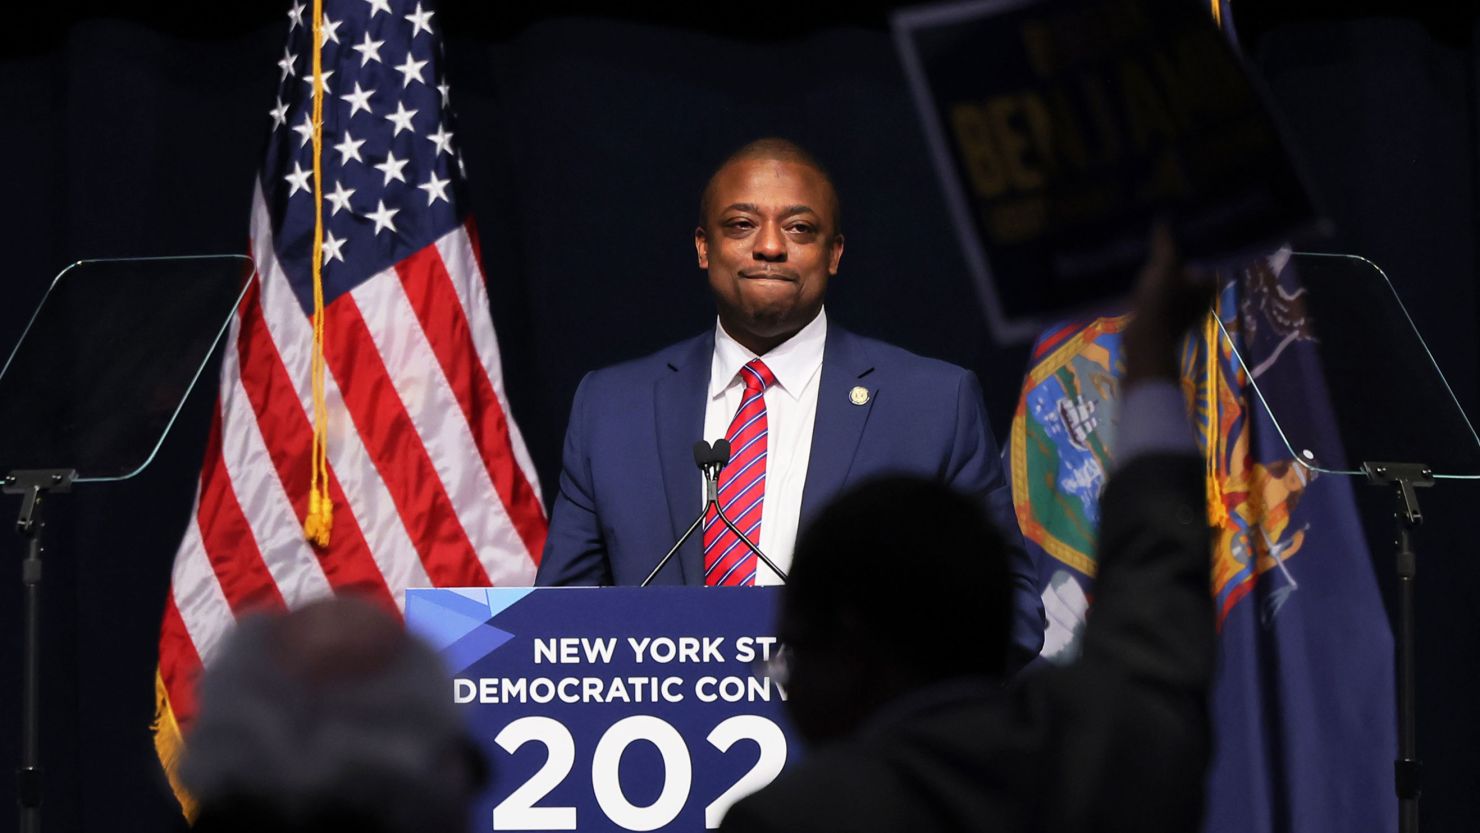 New York Lt. Gov. Brian Benjamin speaks during the 2022 New York State Democratic Convention at the Sheraton New York Times Square Hotel on February 17, 2022 in New York City. 